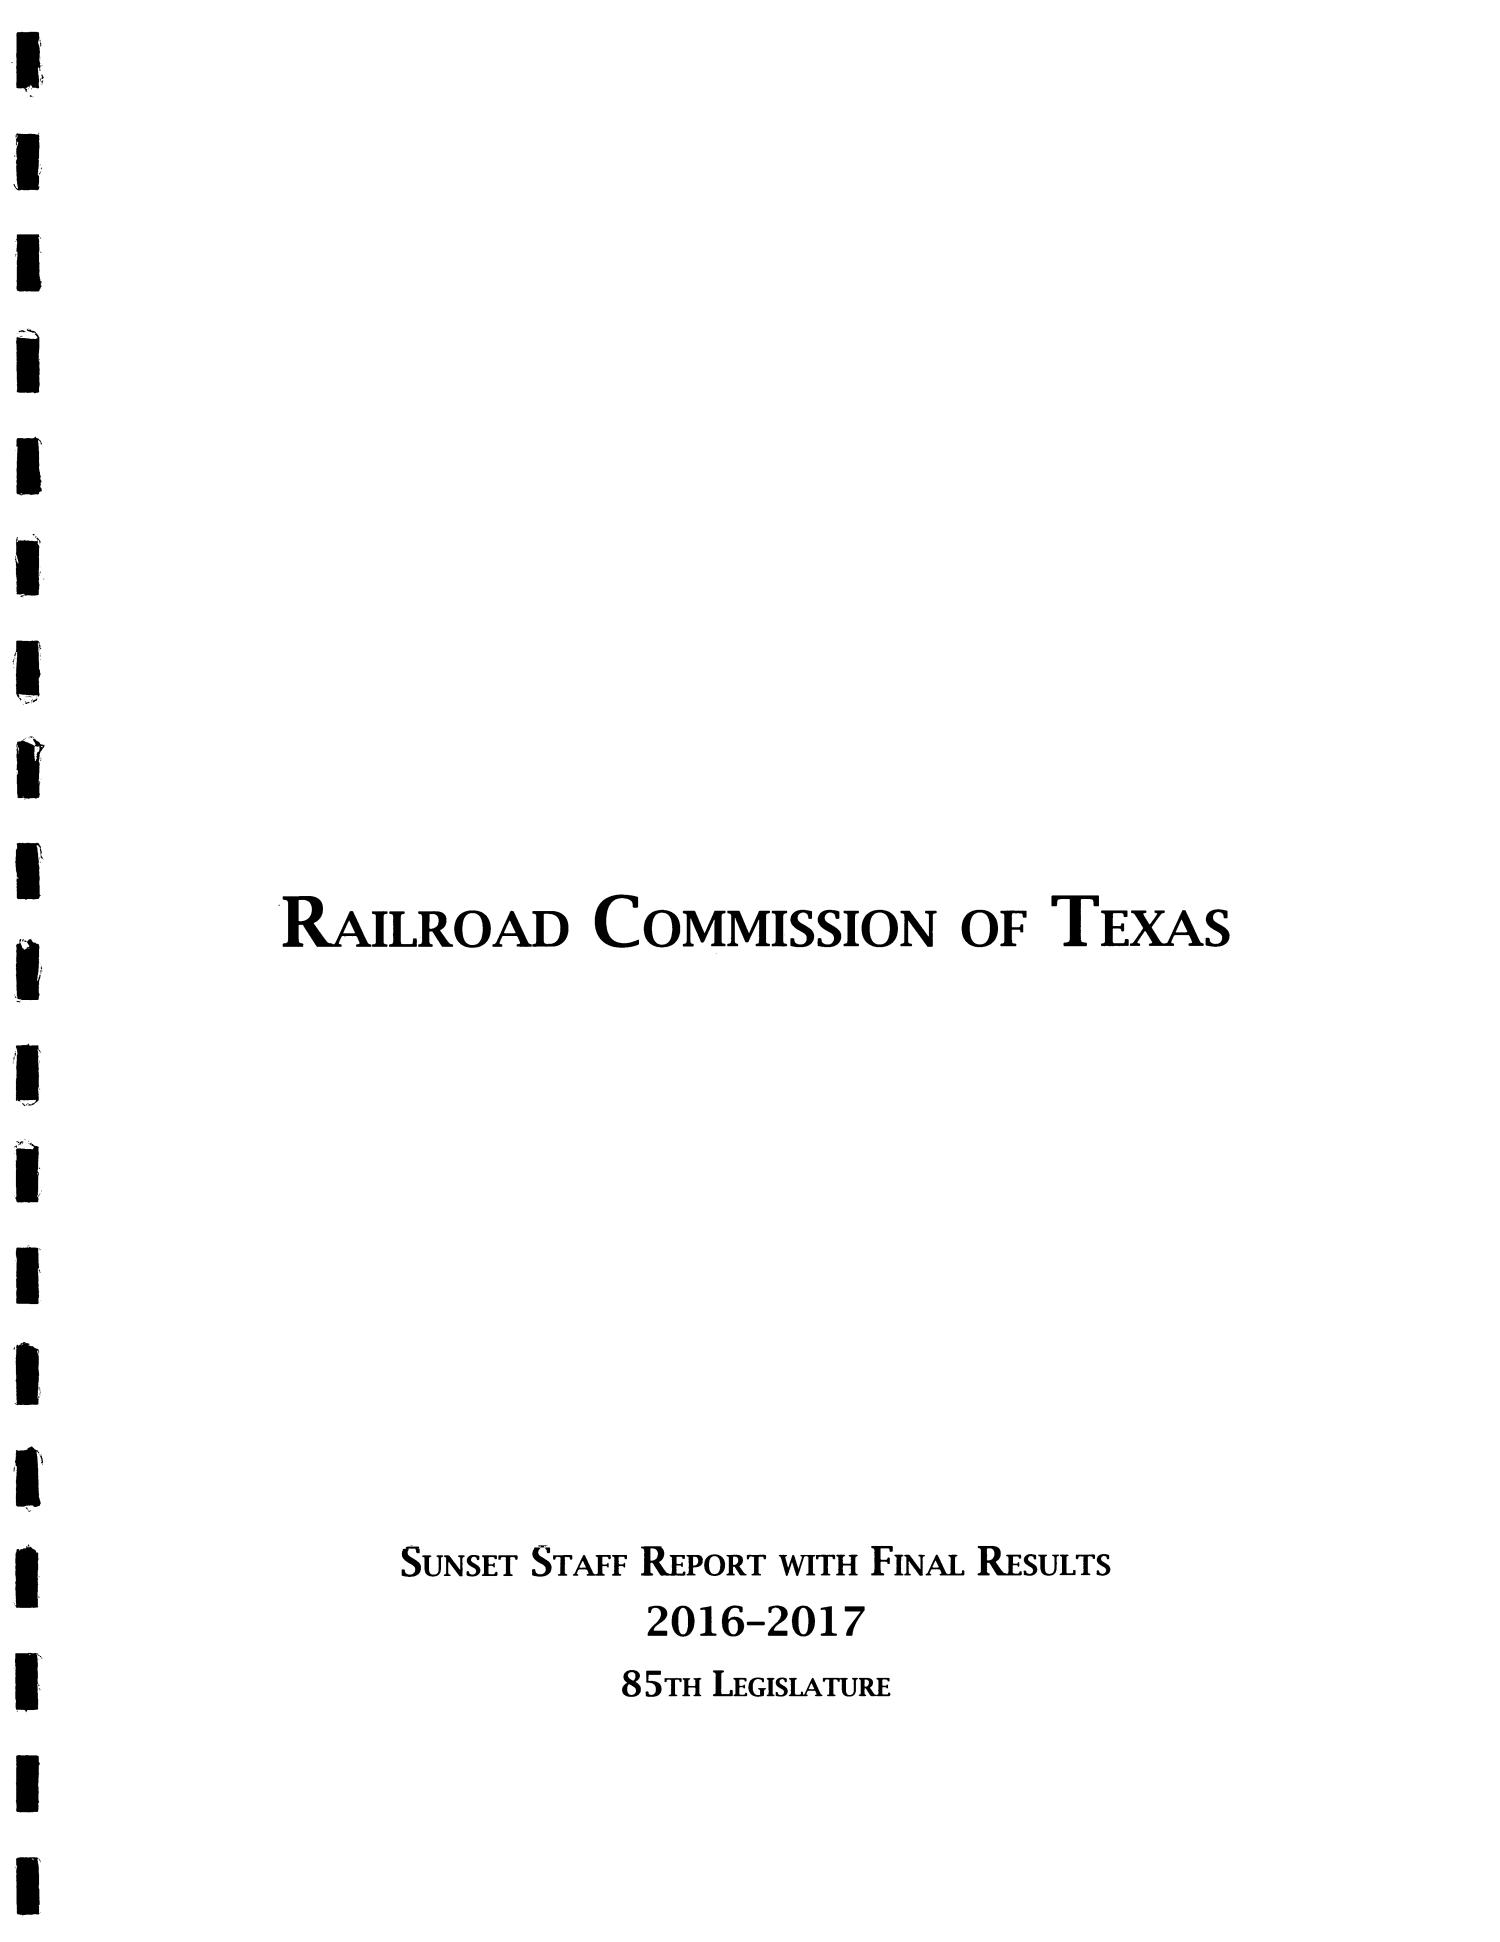 Staff Report with Final Results: Railroad Commission of Texas
                                                
                                                    Title Page
                                                